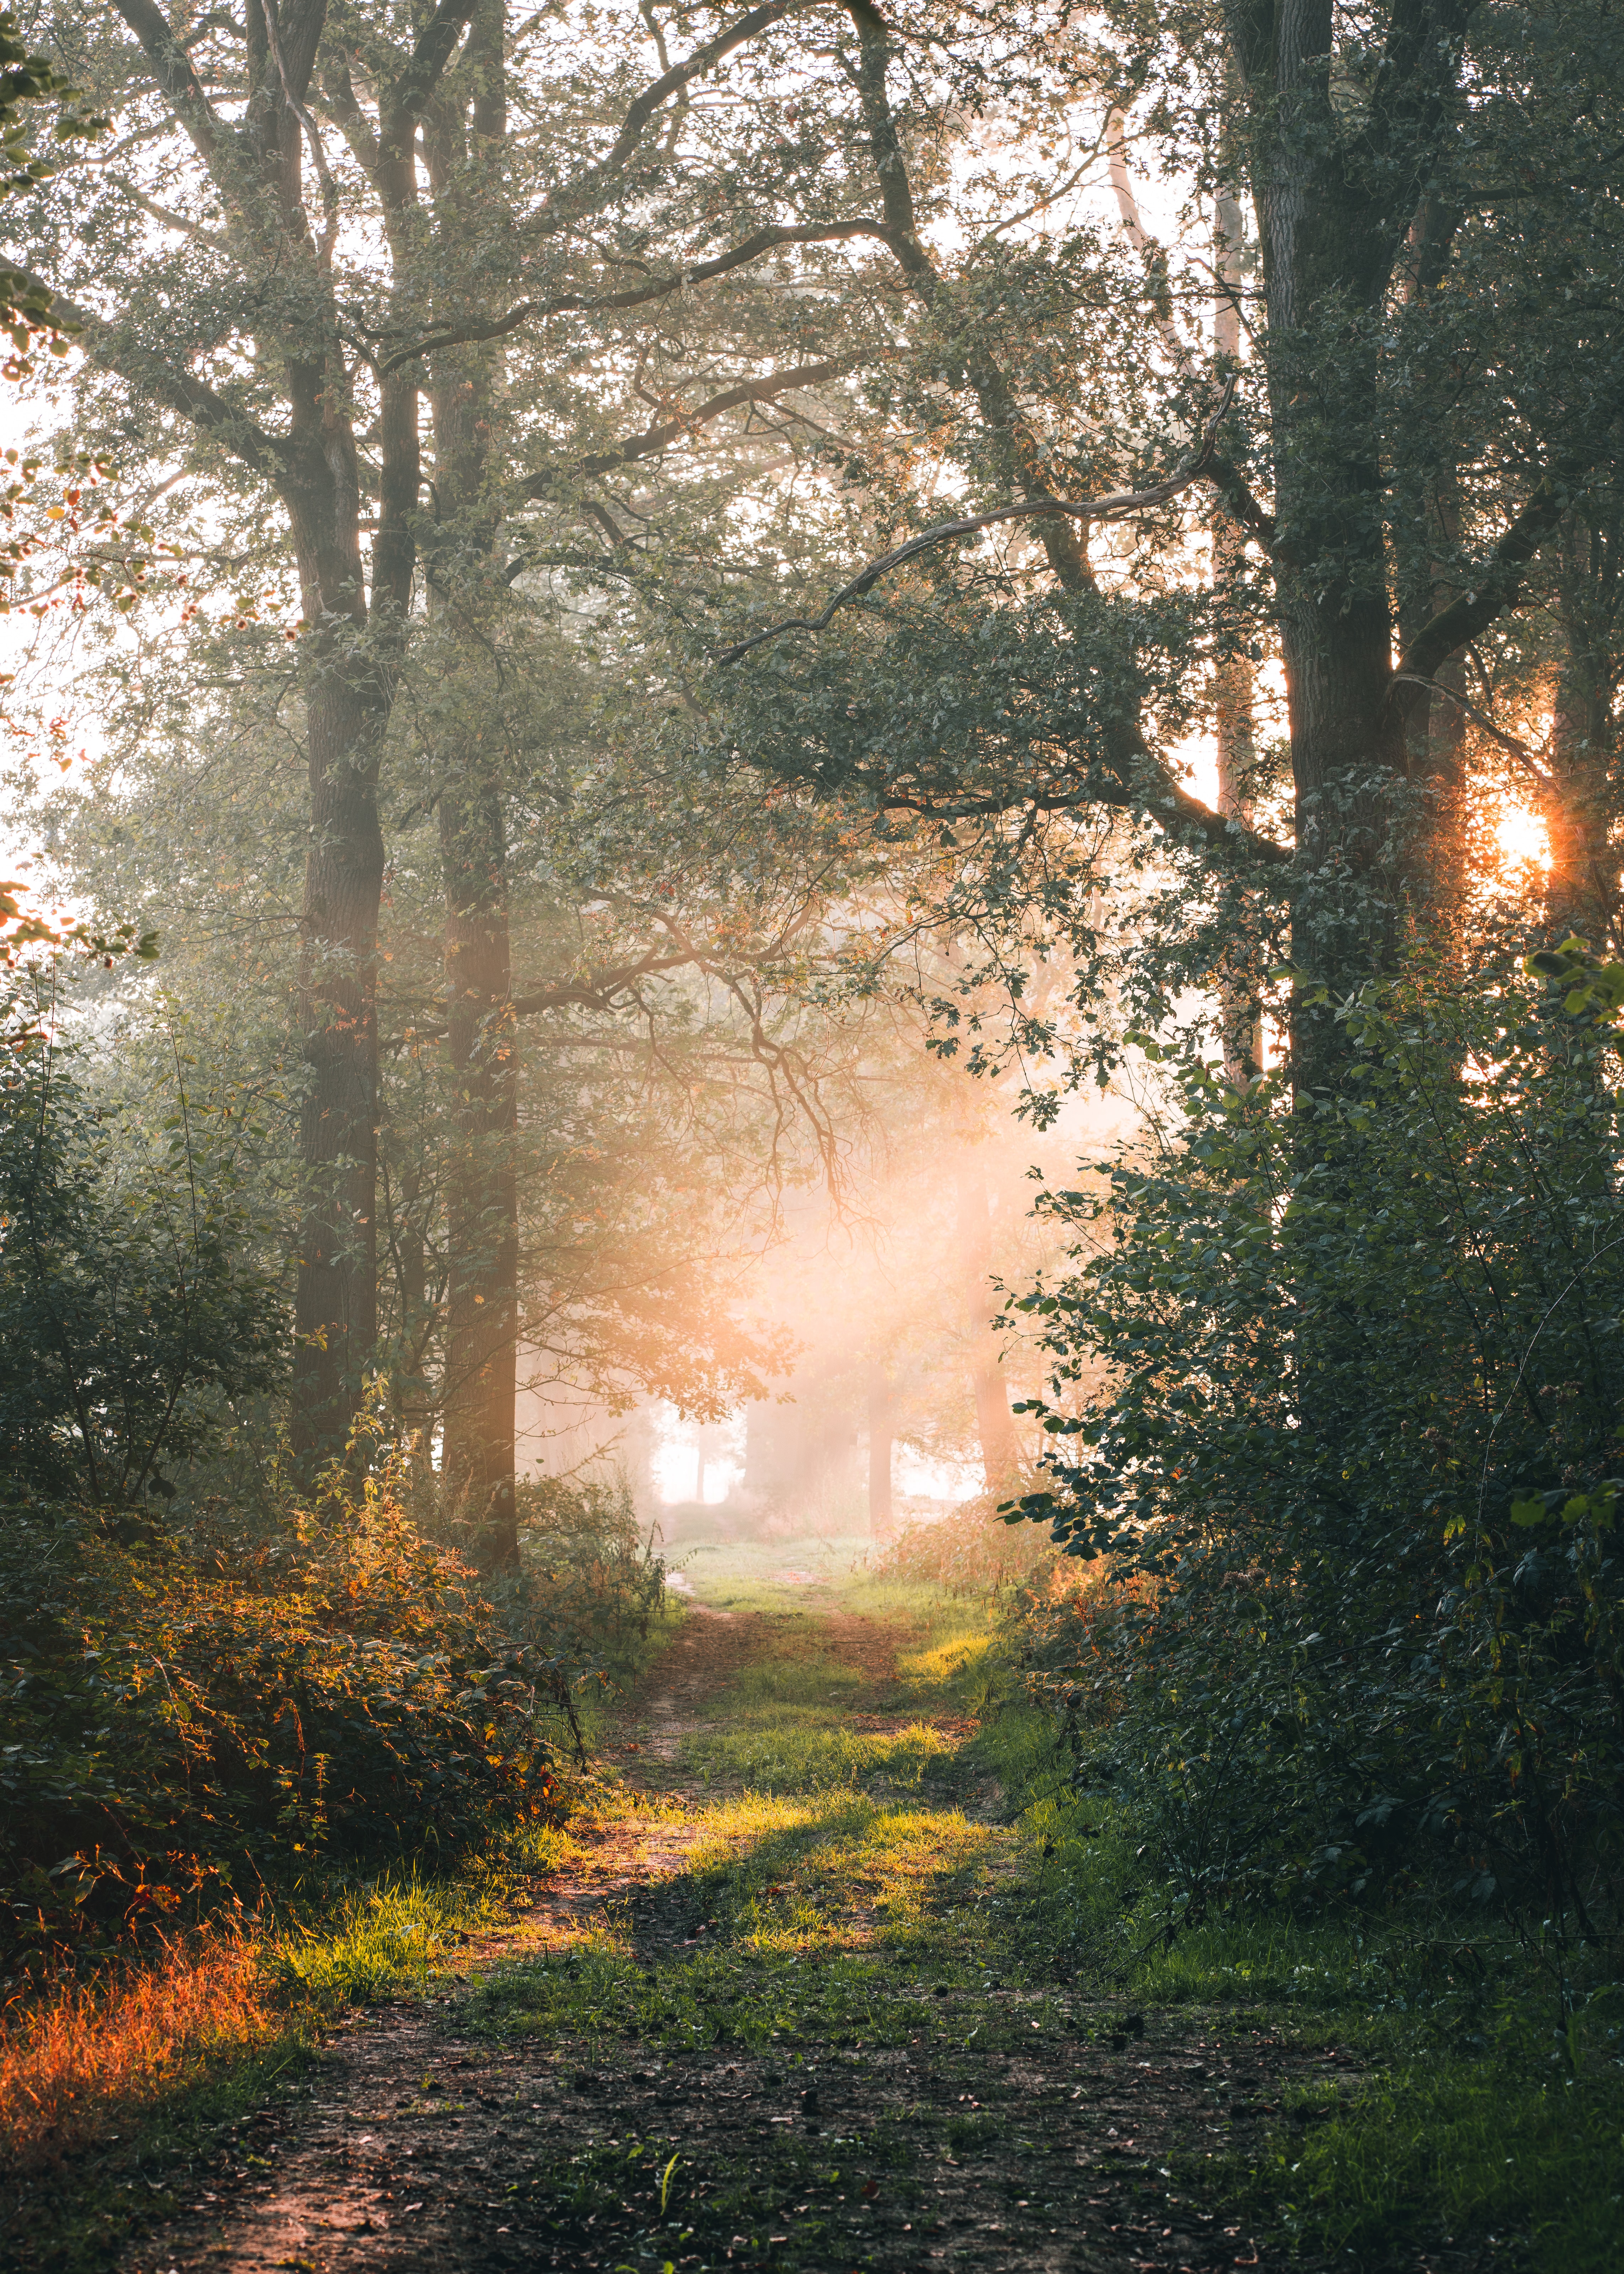 Download PC Wallpaper forest, nature, sun, beams, rays, branches, path